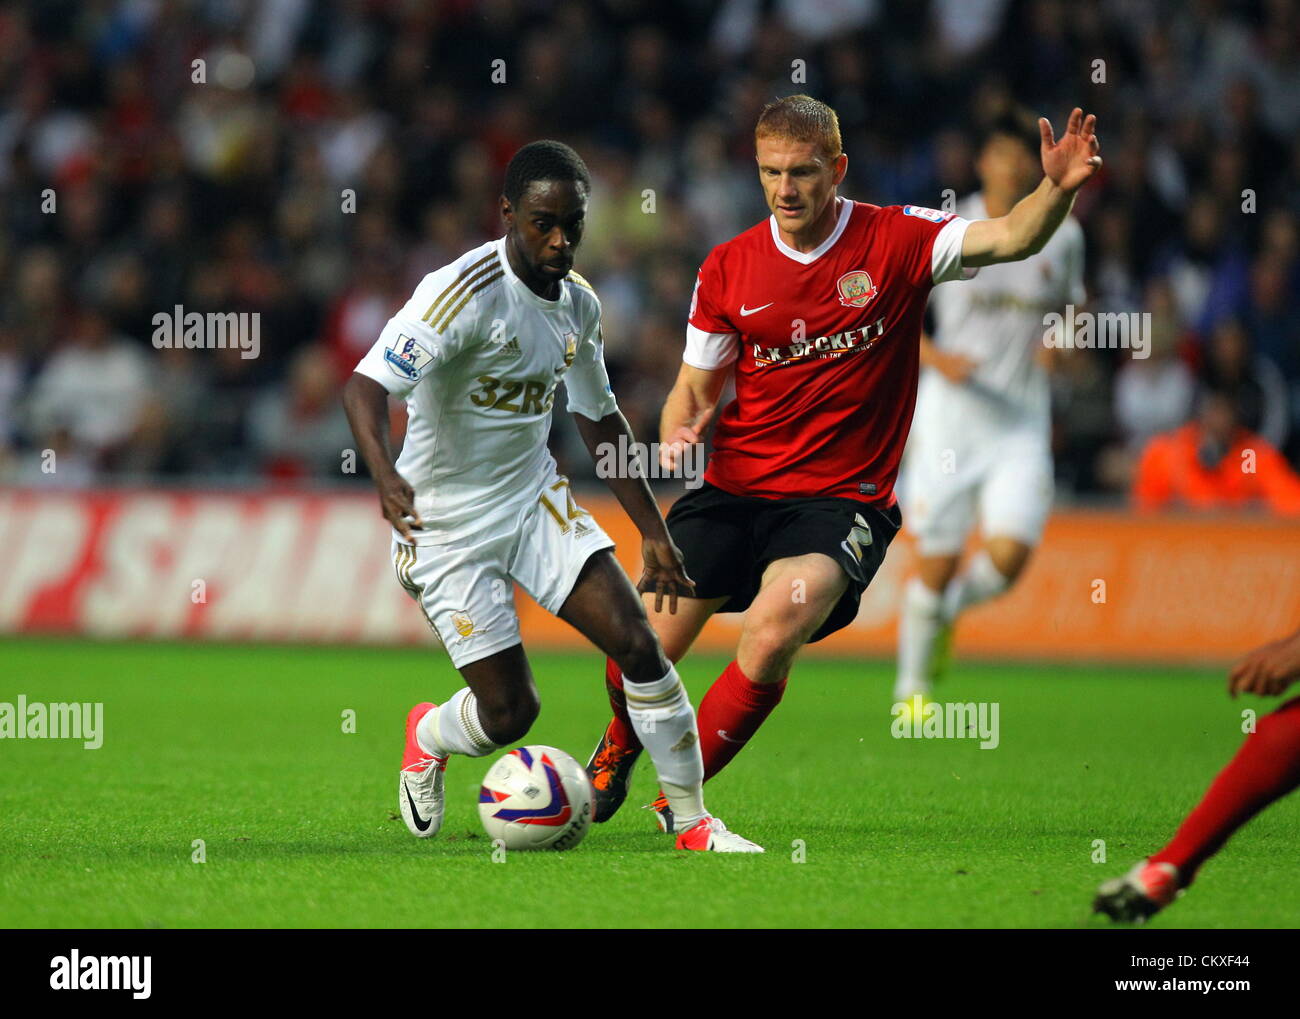 Liberty Stadium, Swansea, UK. 28th Aug 2012.   Pictured L-R: Nathan Dyer of Swansea challenged by Bobby Hassell of Barnsley. Capital One Cup game, Swansea City FC v Barnsley at the Liberty Stadium, south Wales, UK. Credit:  D Legakis / Alamy Live News Stock Photo